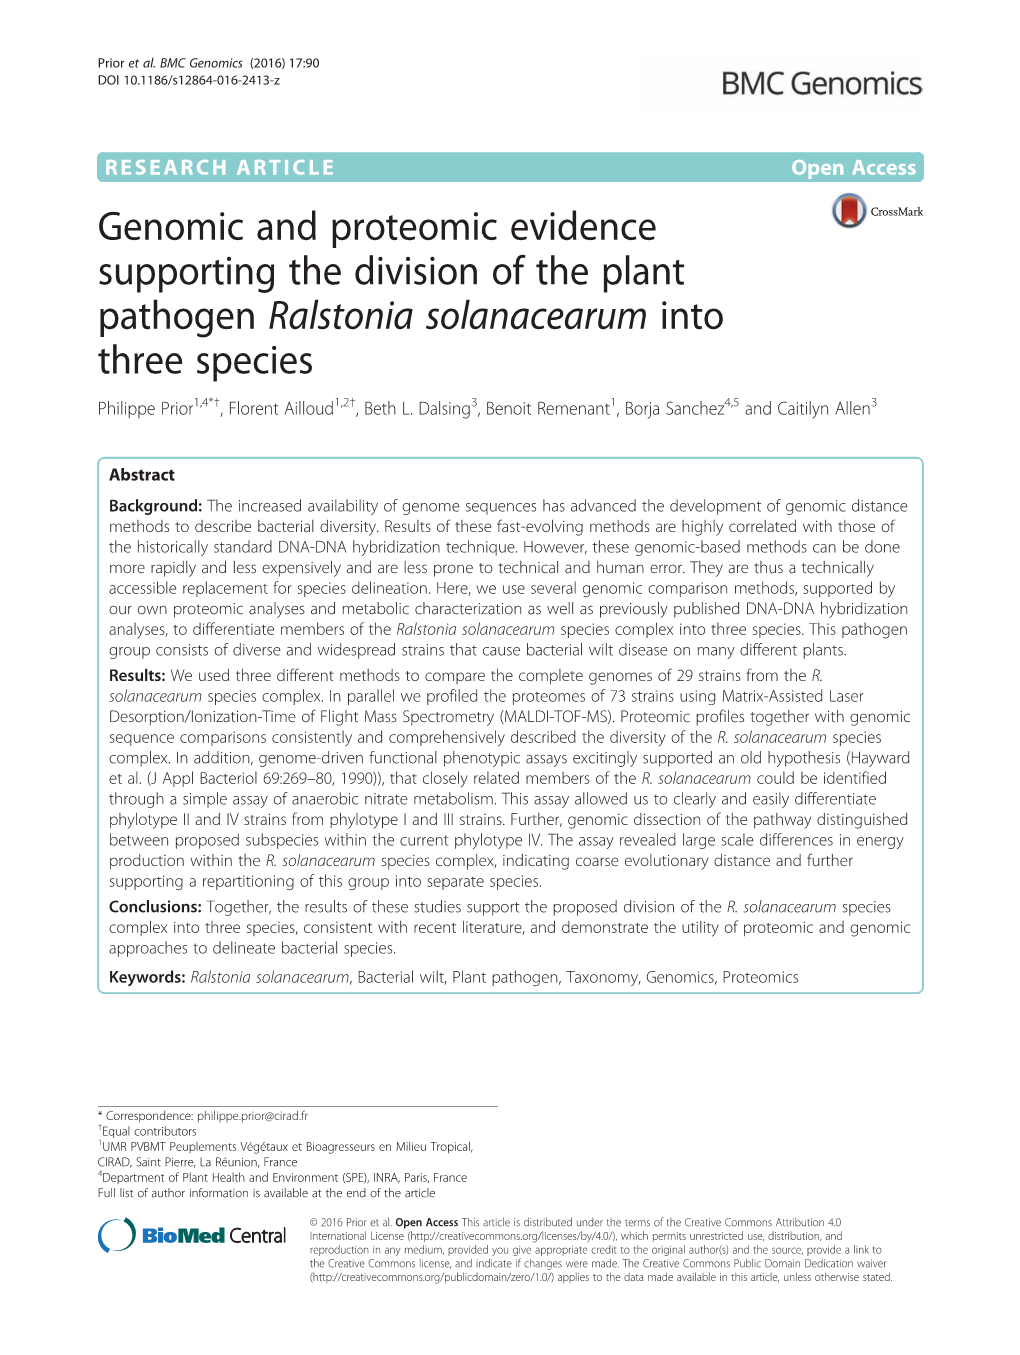 Genomic and Proteomic Evidence Supporting the Division of the Plant